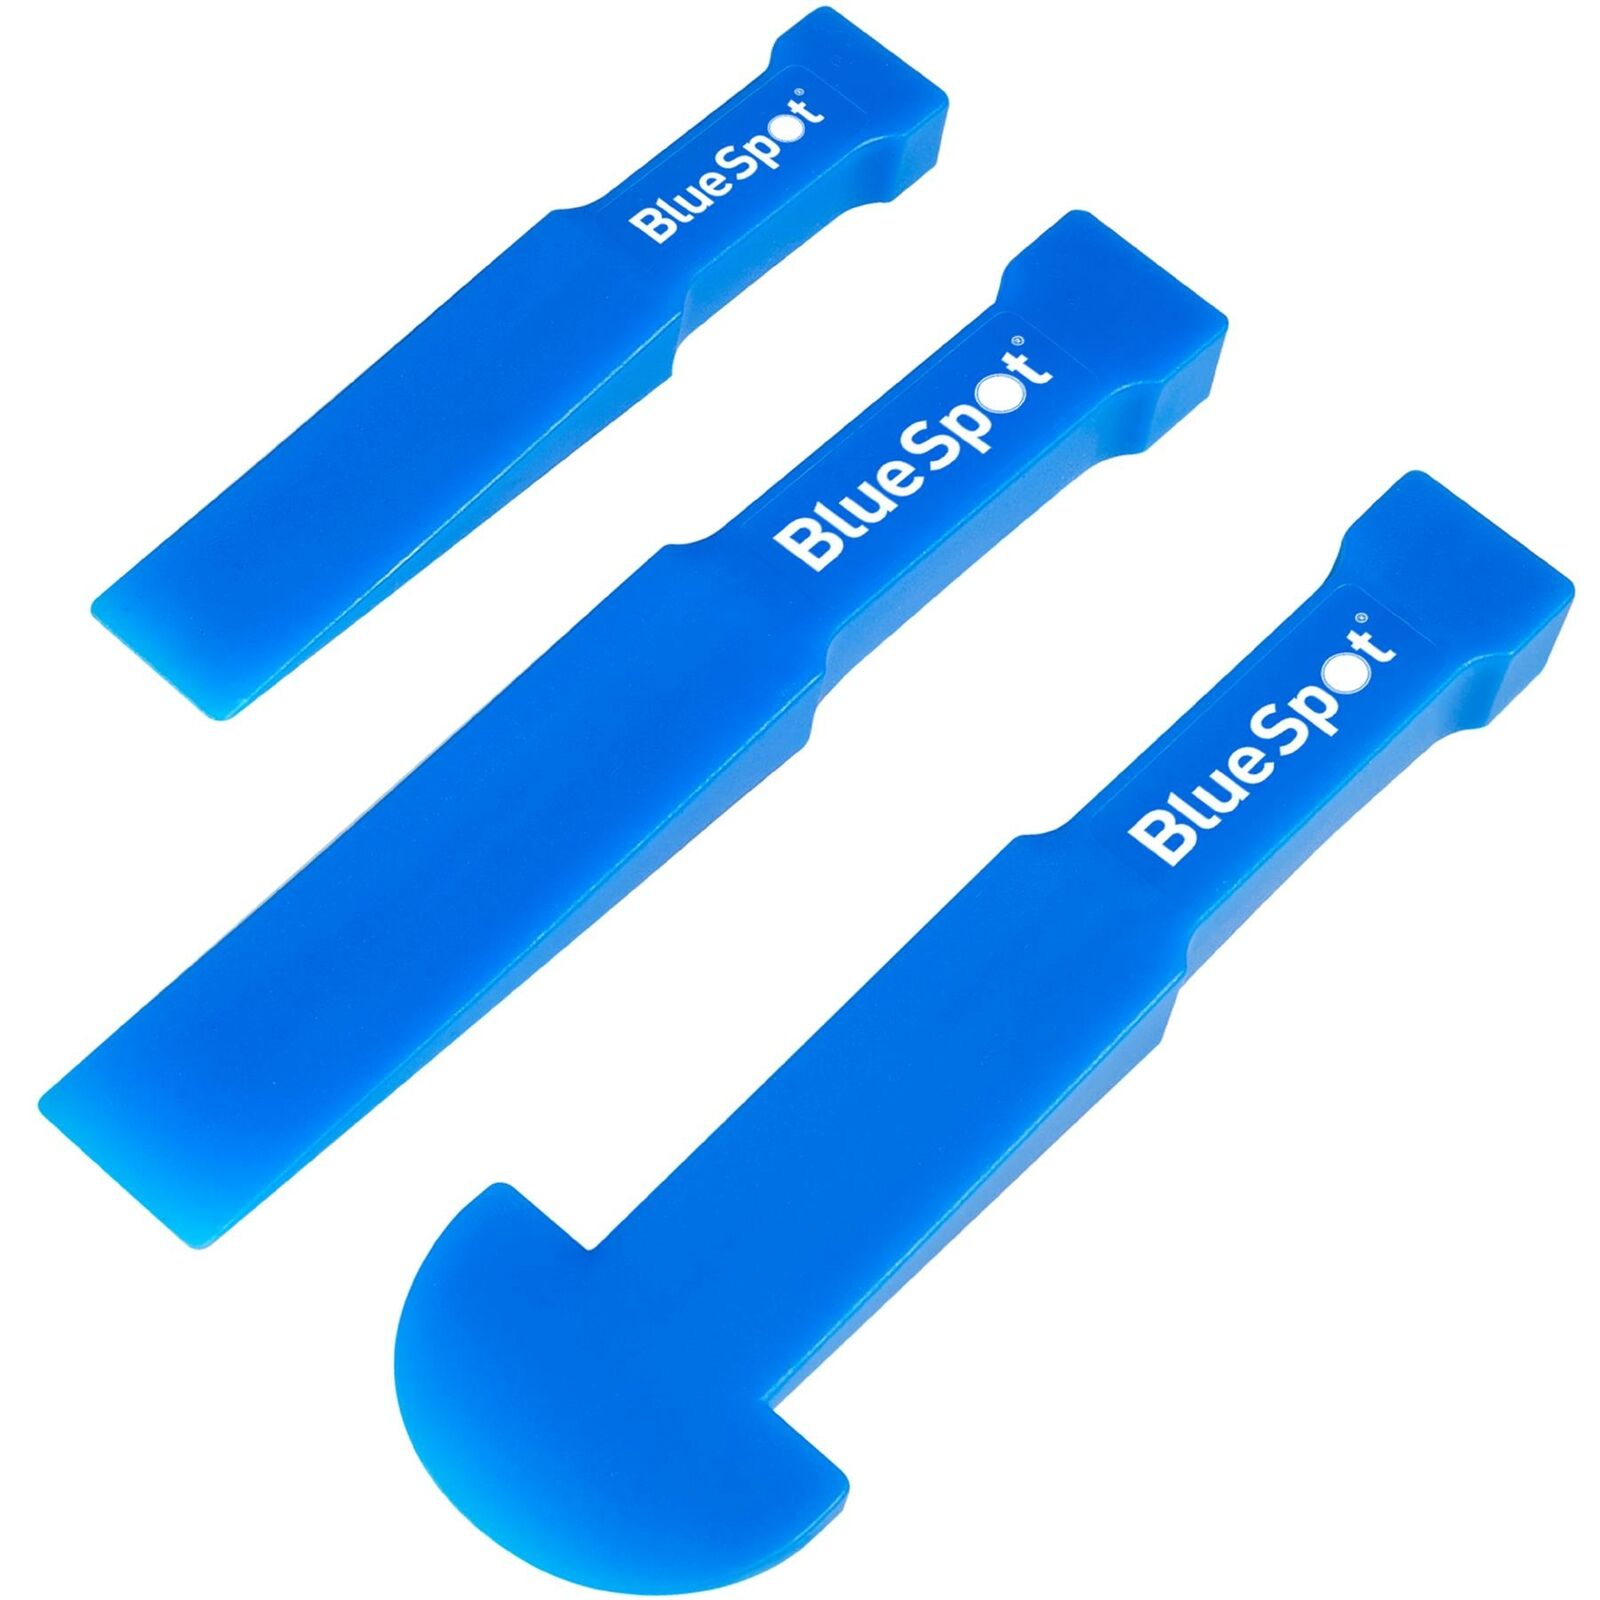 BlueSpot 6pc Non Marring Car Trim Removal And Pry Tool Kit Panel Door Dash Set